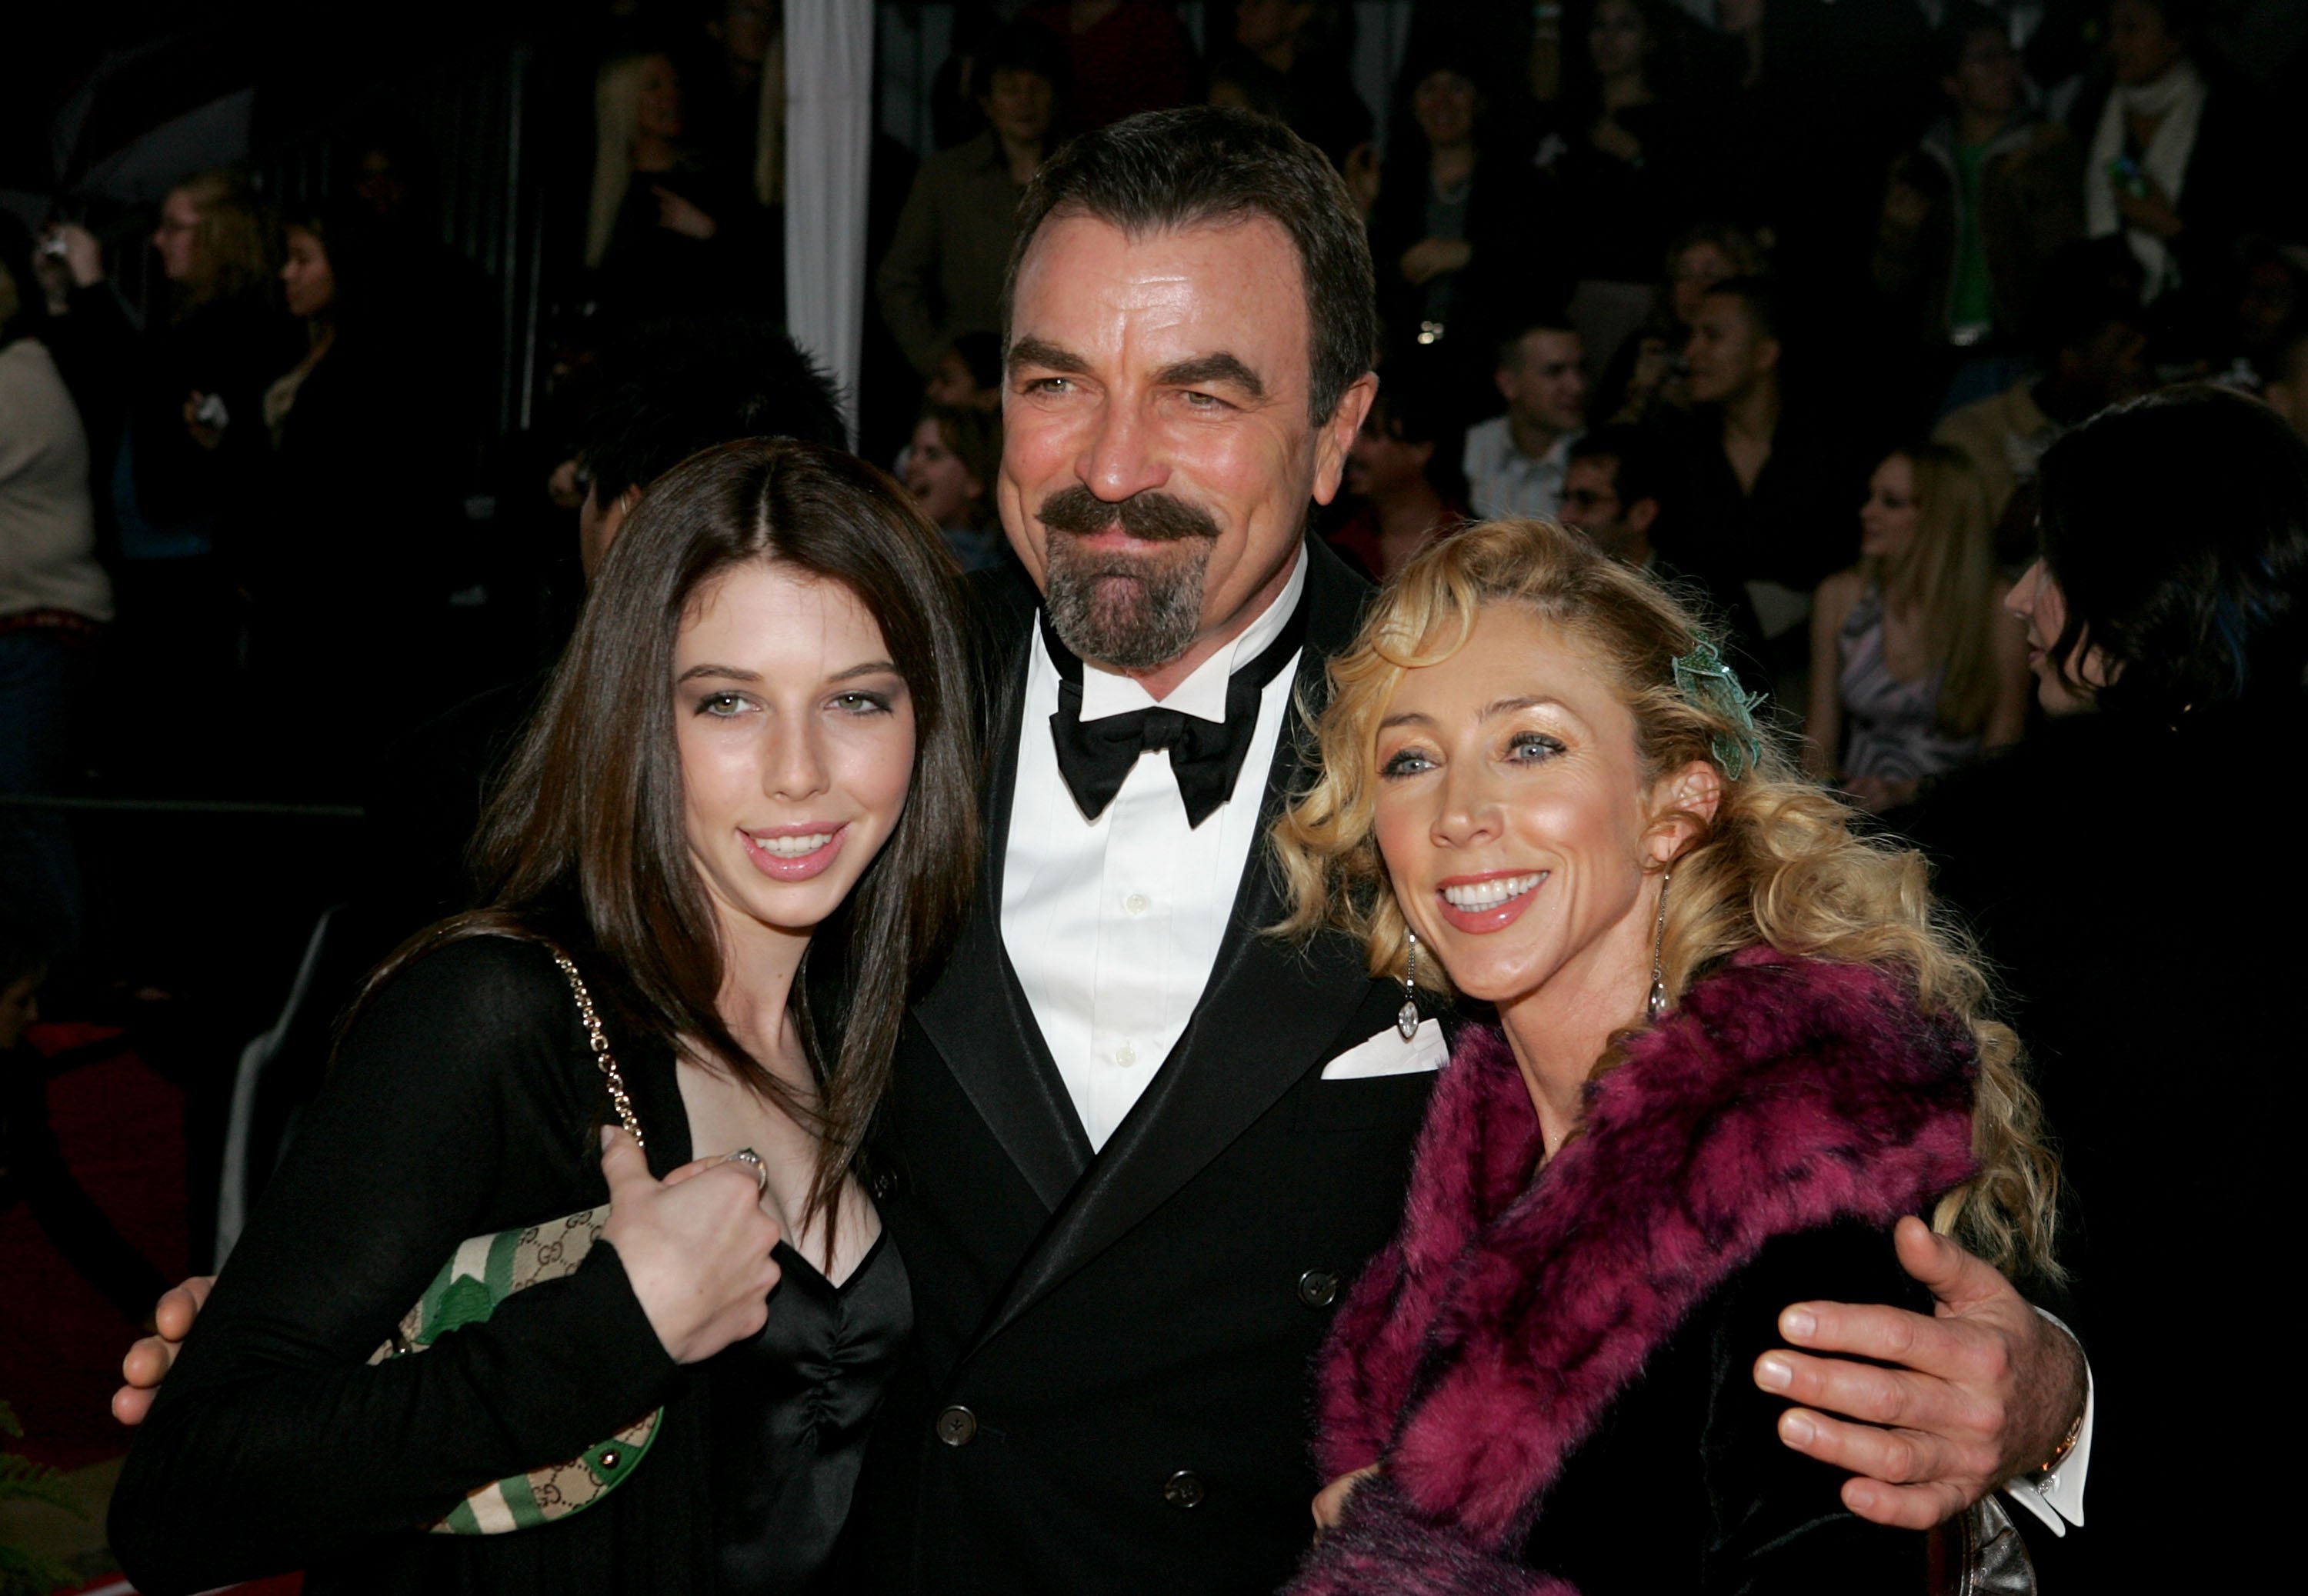 Tom Selleck with Jillie Mack and daughter Hannah arriving at the 31st Annual People's Choice Awards held in the Pasadena Civic Auditorium on January 9, 2005 in Pasadena, California | Photo: Getty Images